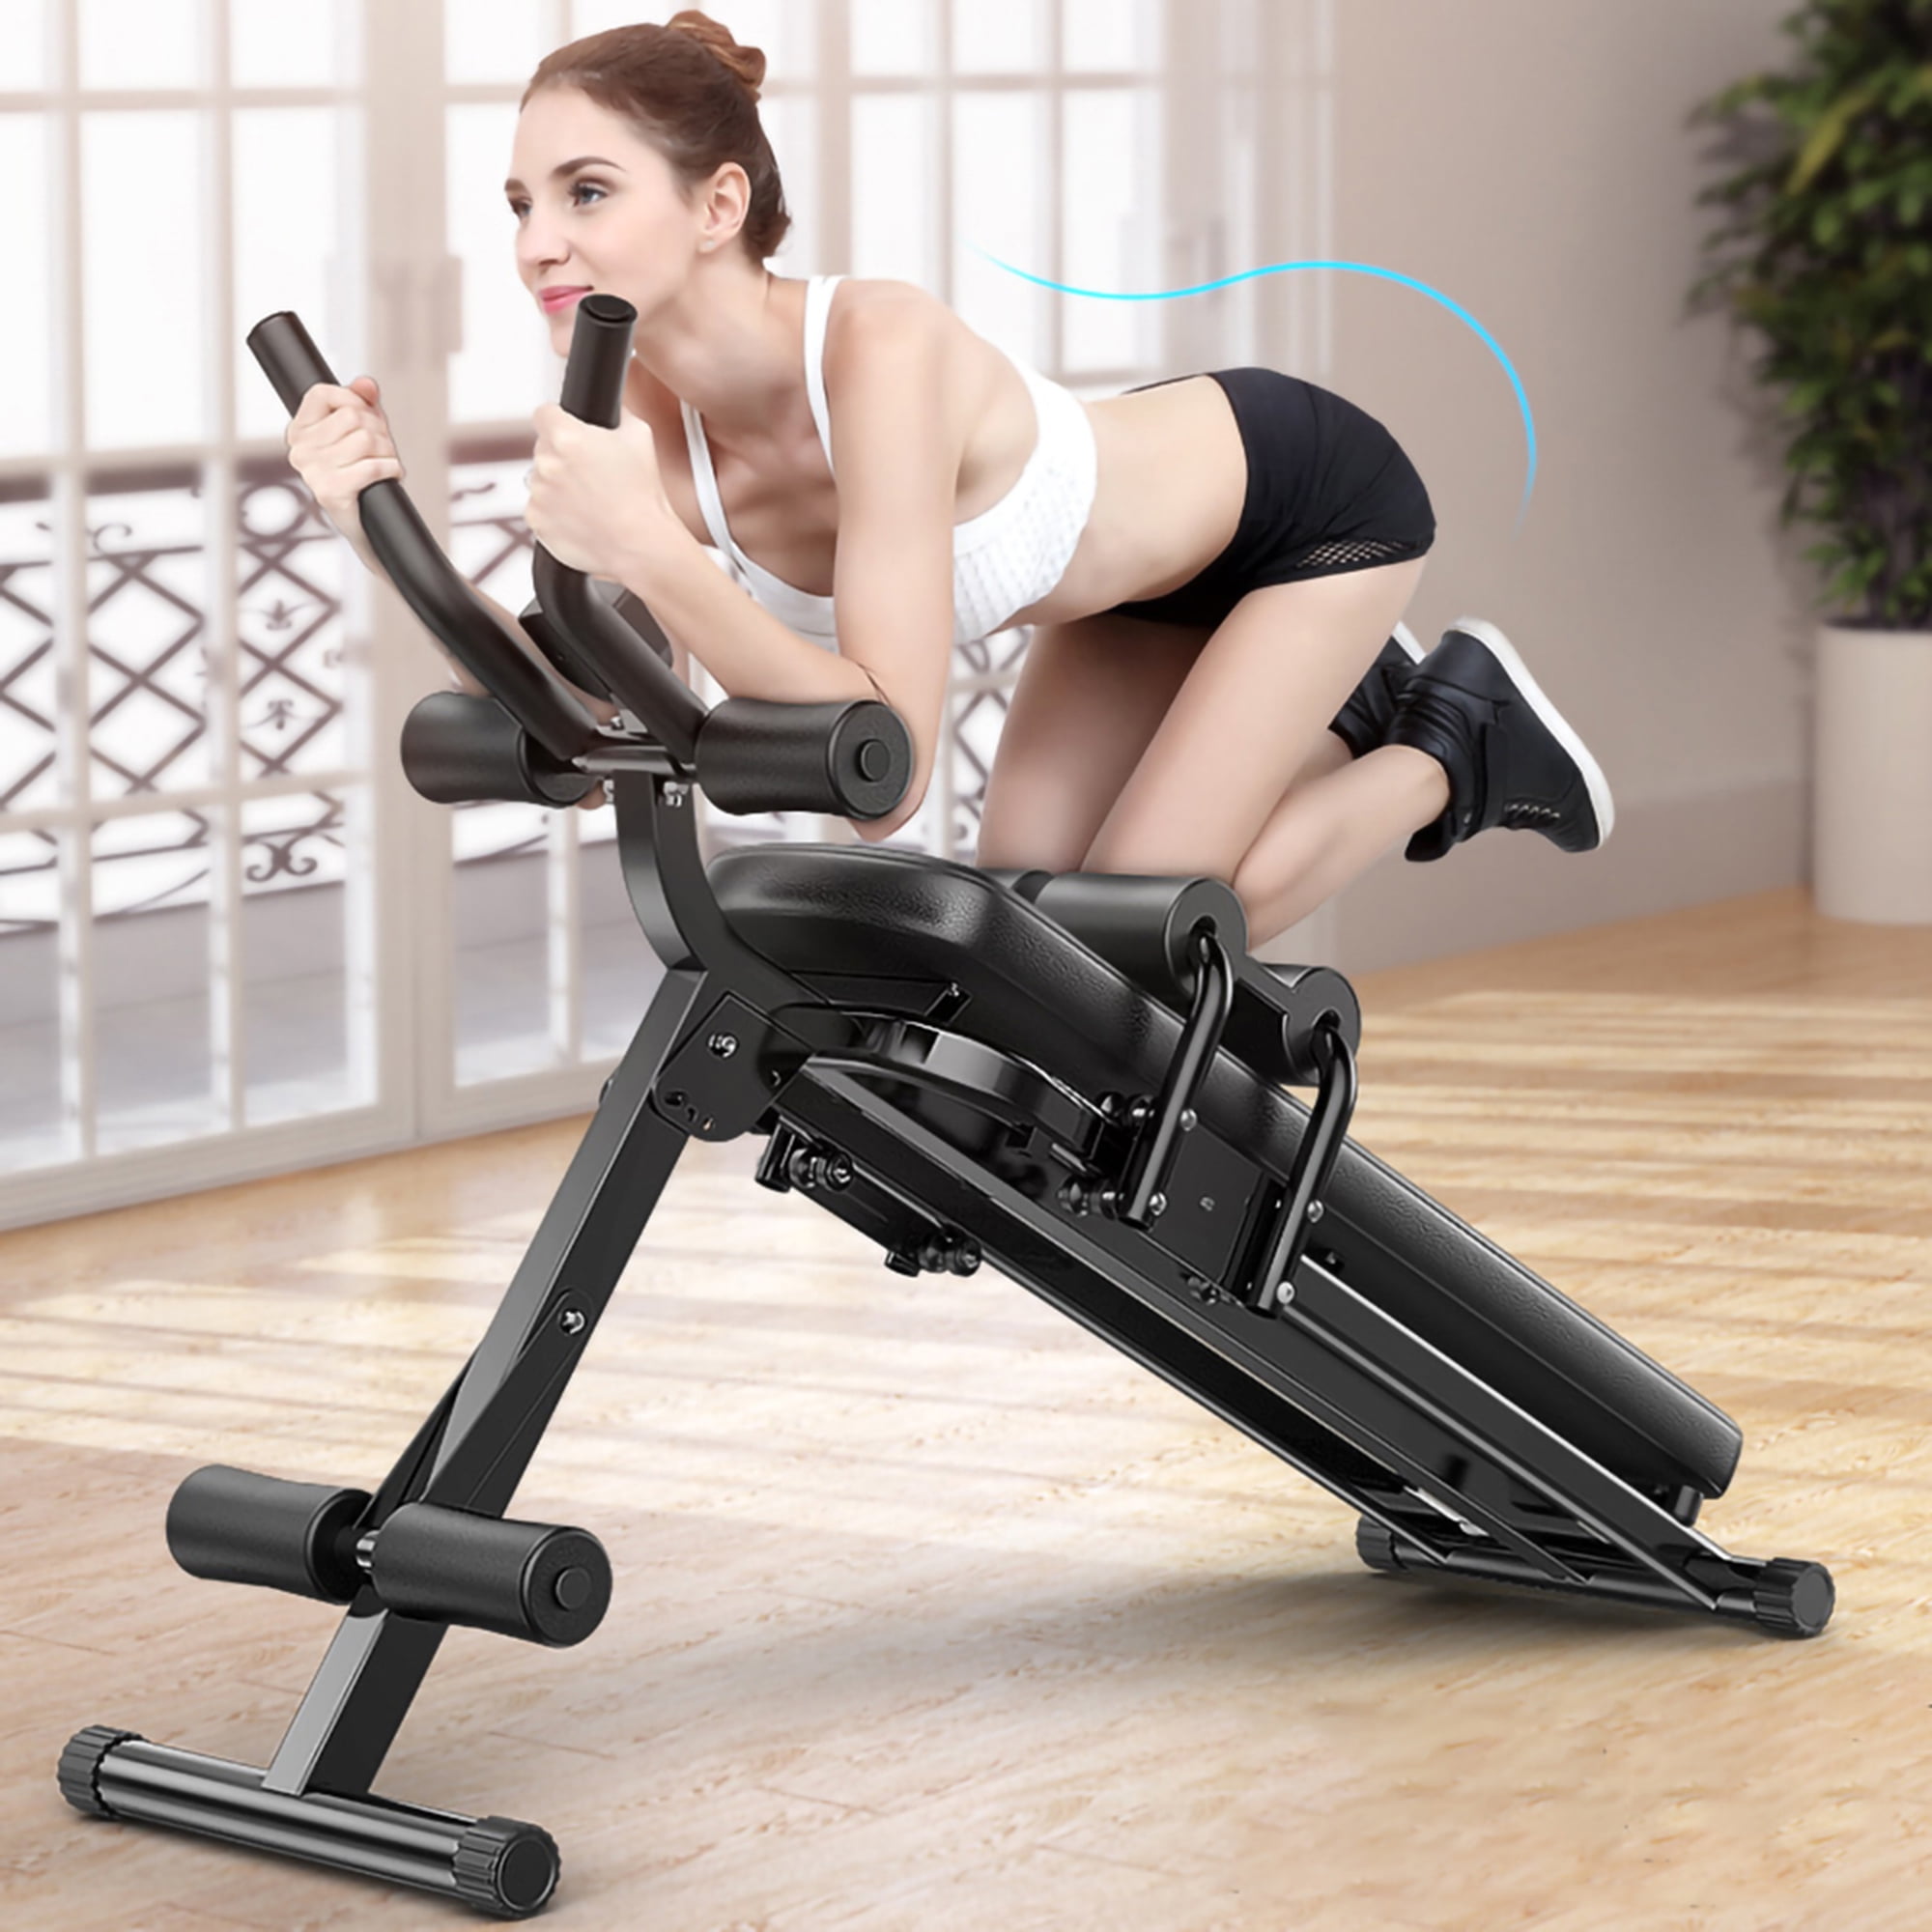 Ab Abdominal Arm Trainers Sit-up Bench Leg Exercise Bike Workout Machine Home US 